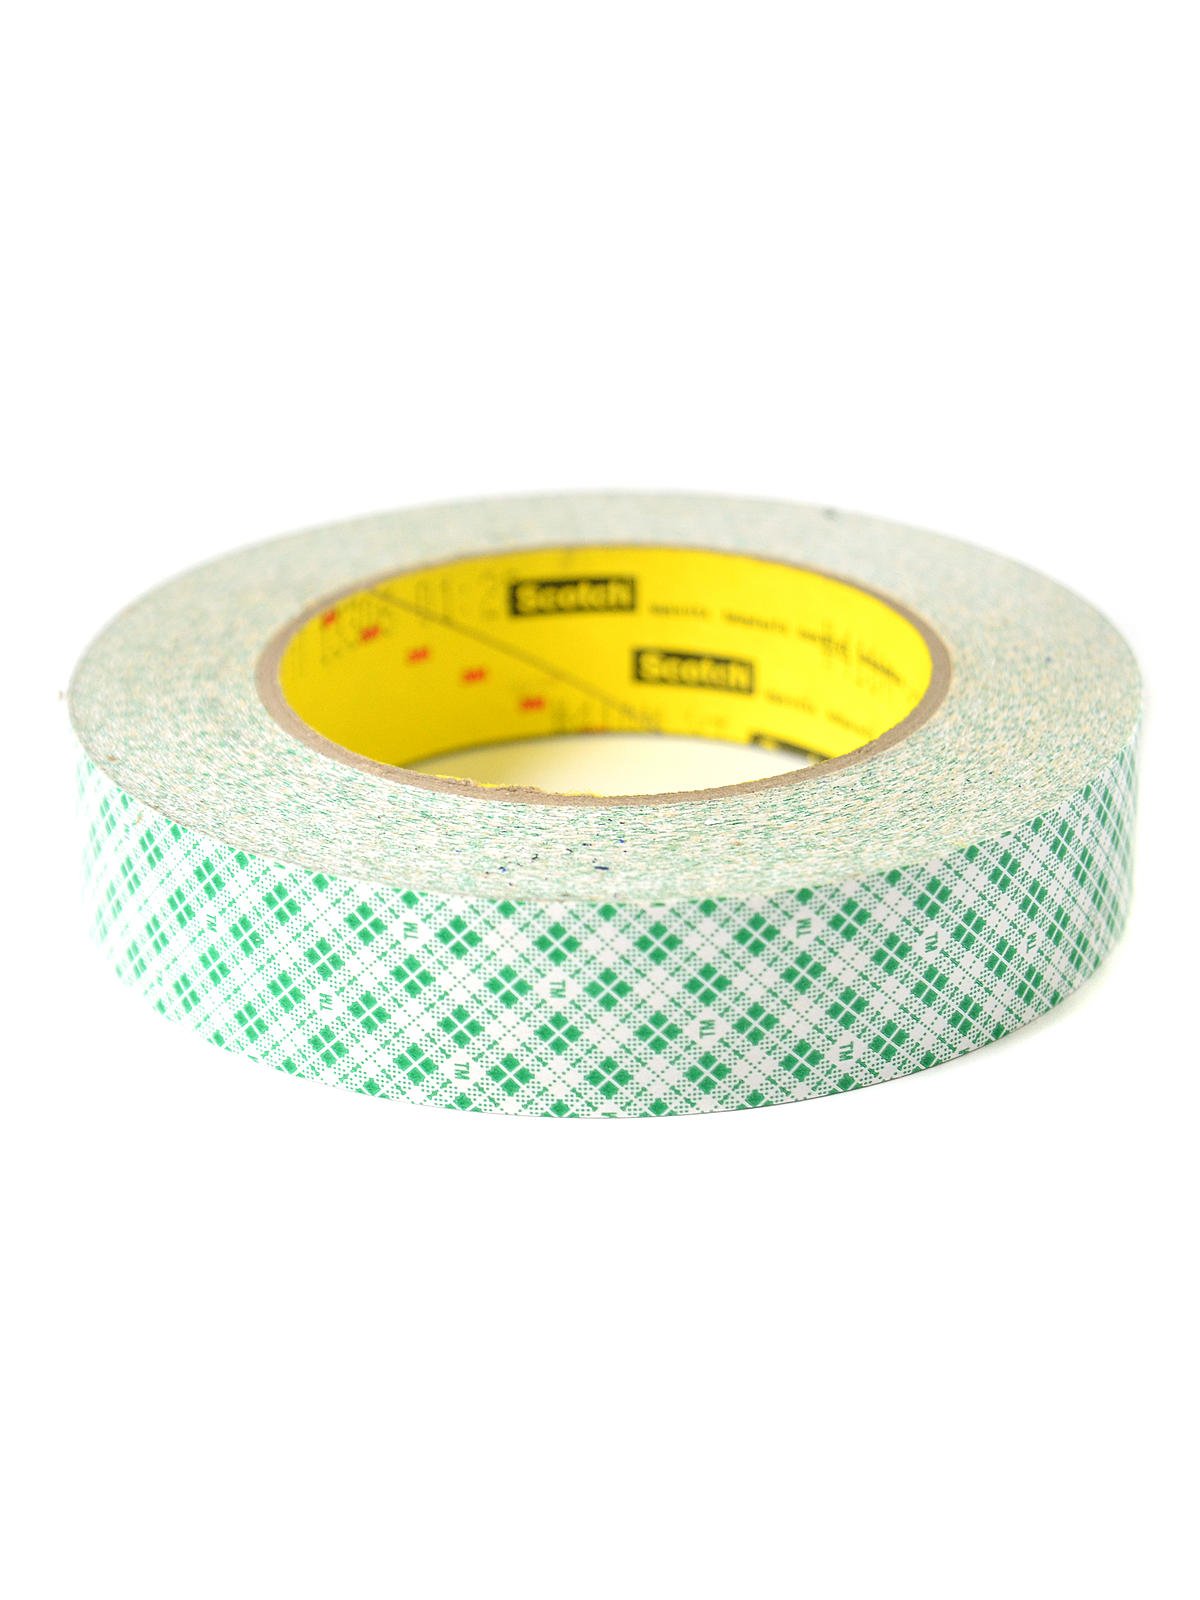 3M Double Coated Tissue Tape